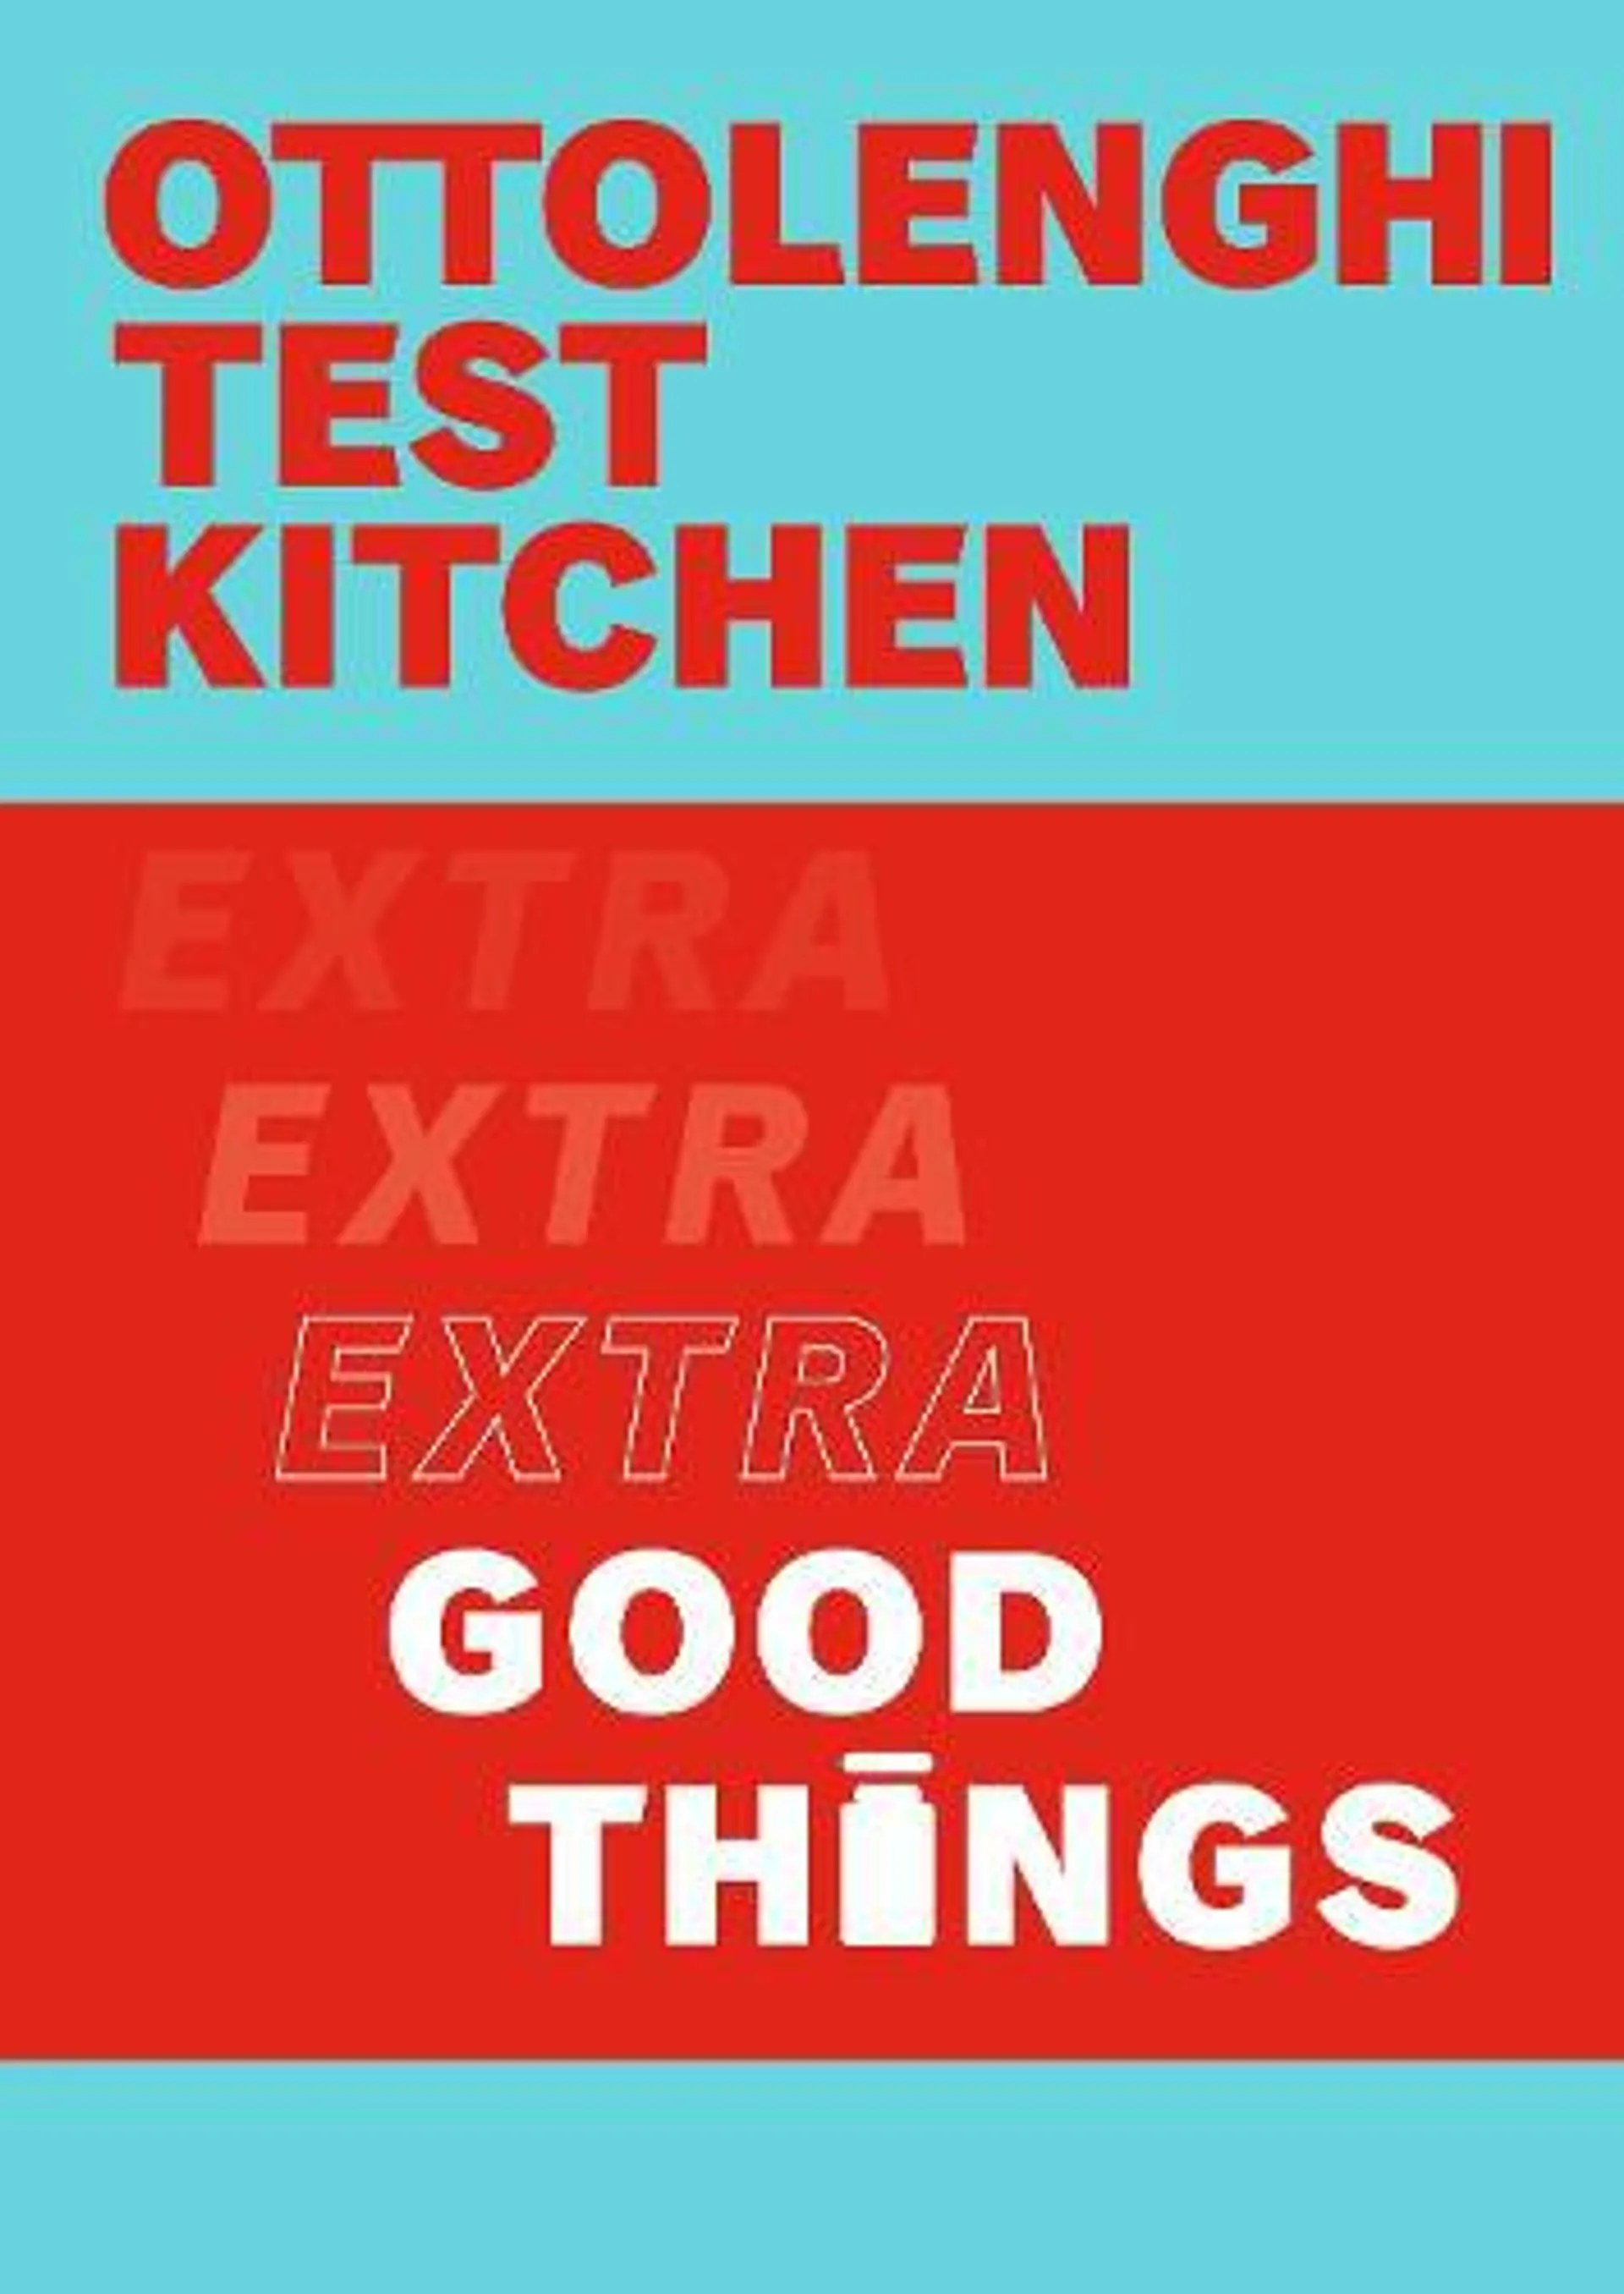 Ottolenghi Test Kitchen: Extra Good Things (Paperback)